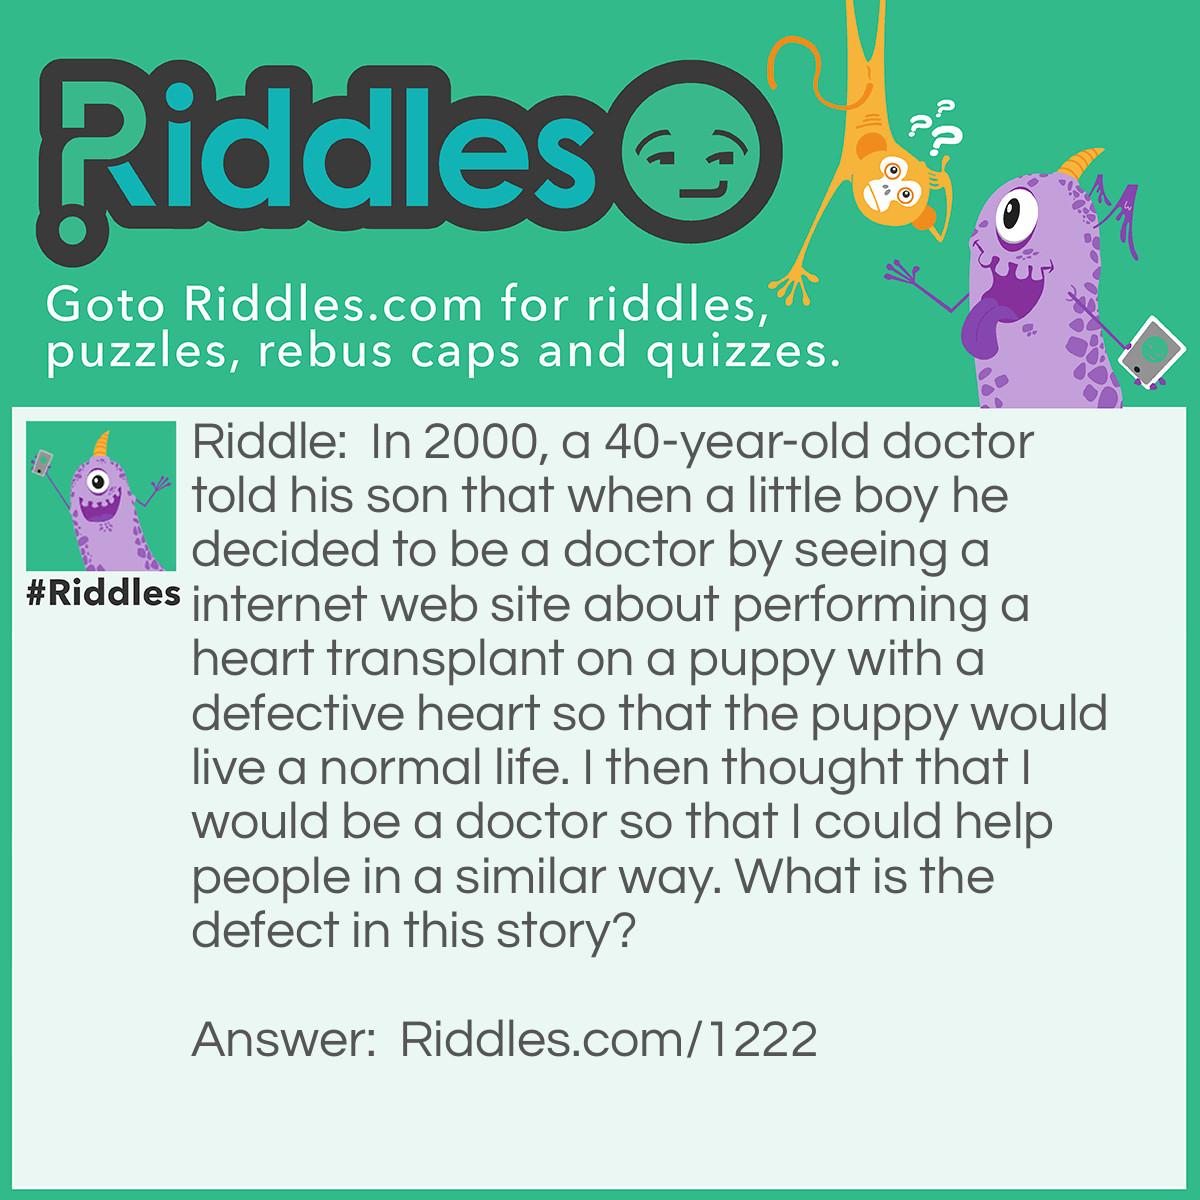 Riddle: In 2000, a 40-year-old doctor told his son that when a little boy he decided to be a doctor by seeing a internet web site about performing a heart transplant on a puppy with a defective heart so that the puppy would live a normal life. I then thought that I would be a doctor so that I could help people in a similar way. What is the defect in this story? Answer: The internet did not exist when the doctor was a little boy.